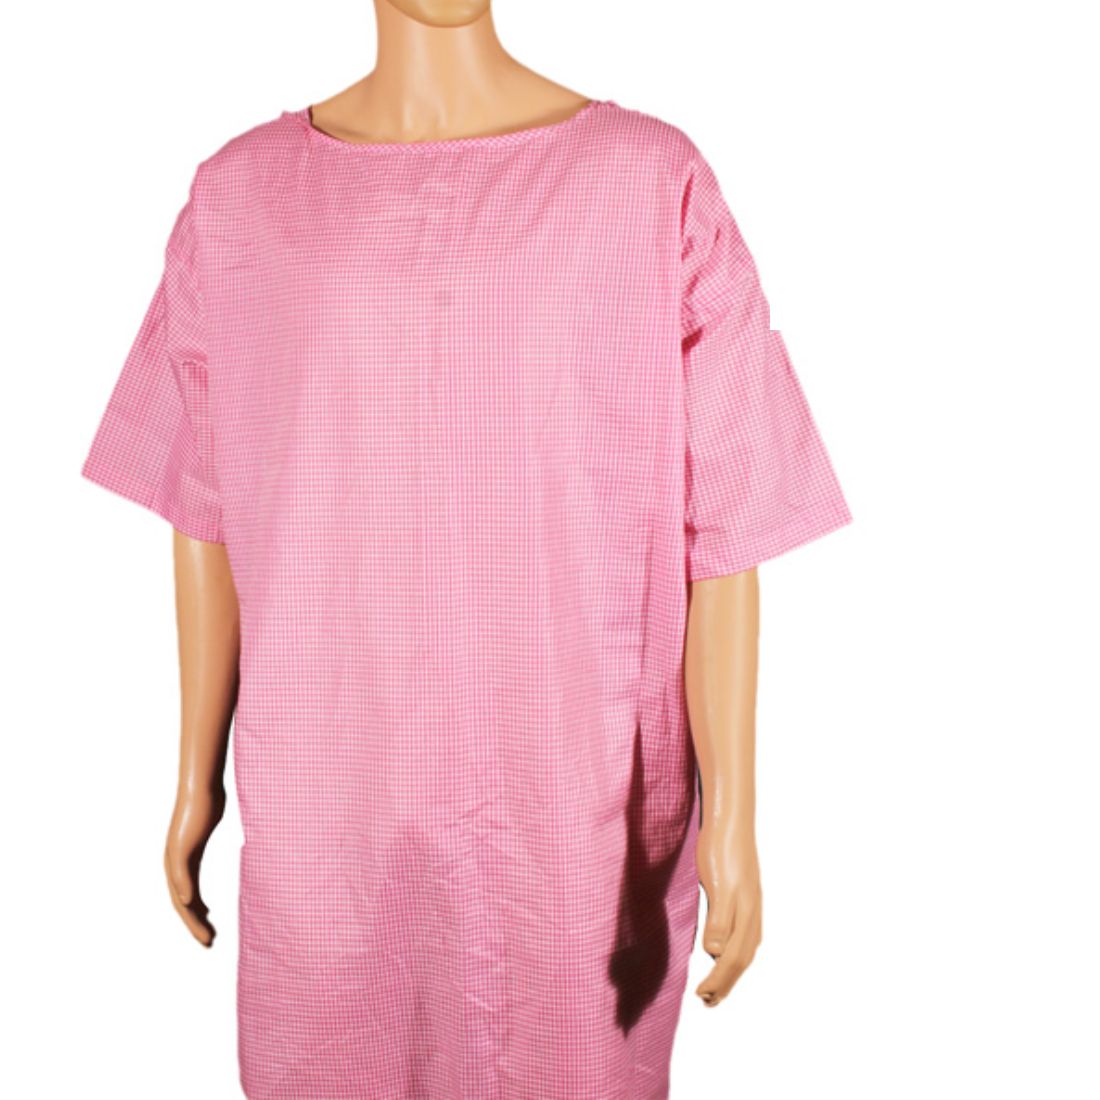 Buy Patient gown A short collarless gown that ties in the back, worn by patients being examined or treated in a doctor's office, clinic, or hospital. 